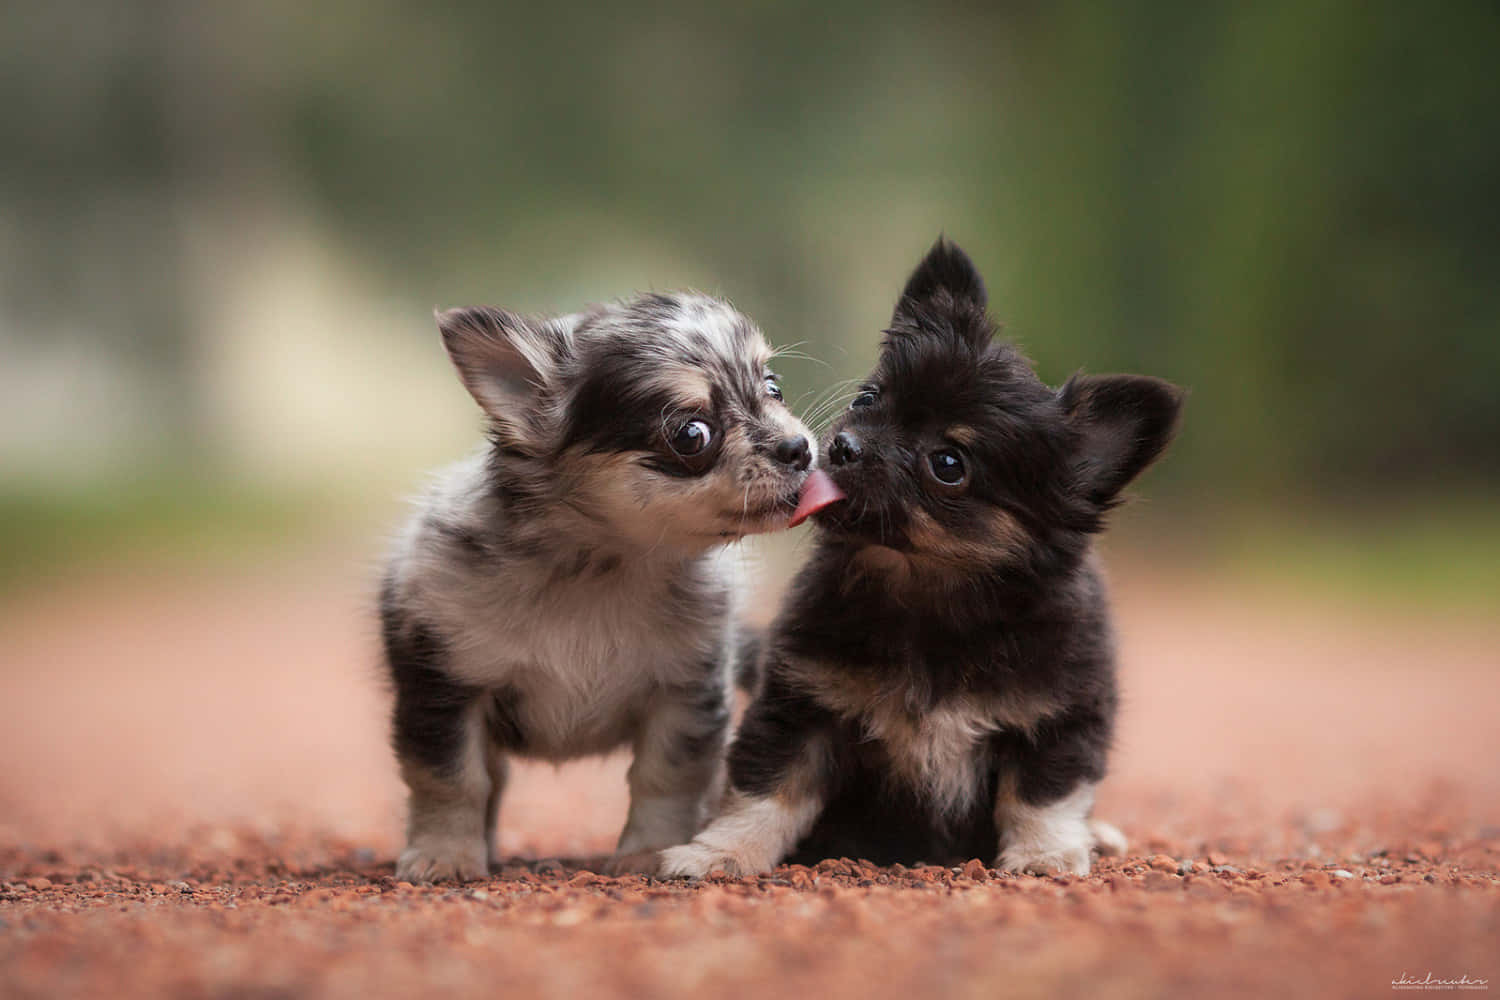 Look at how cute these two puppies are!